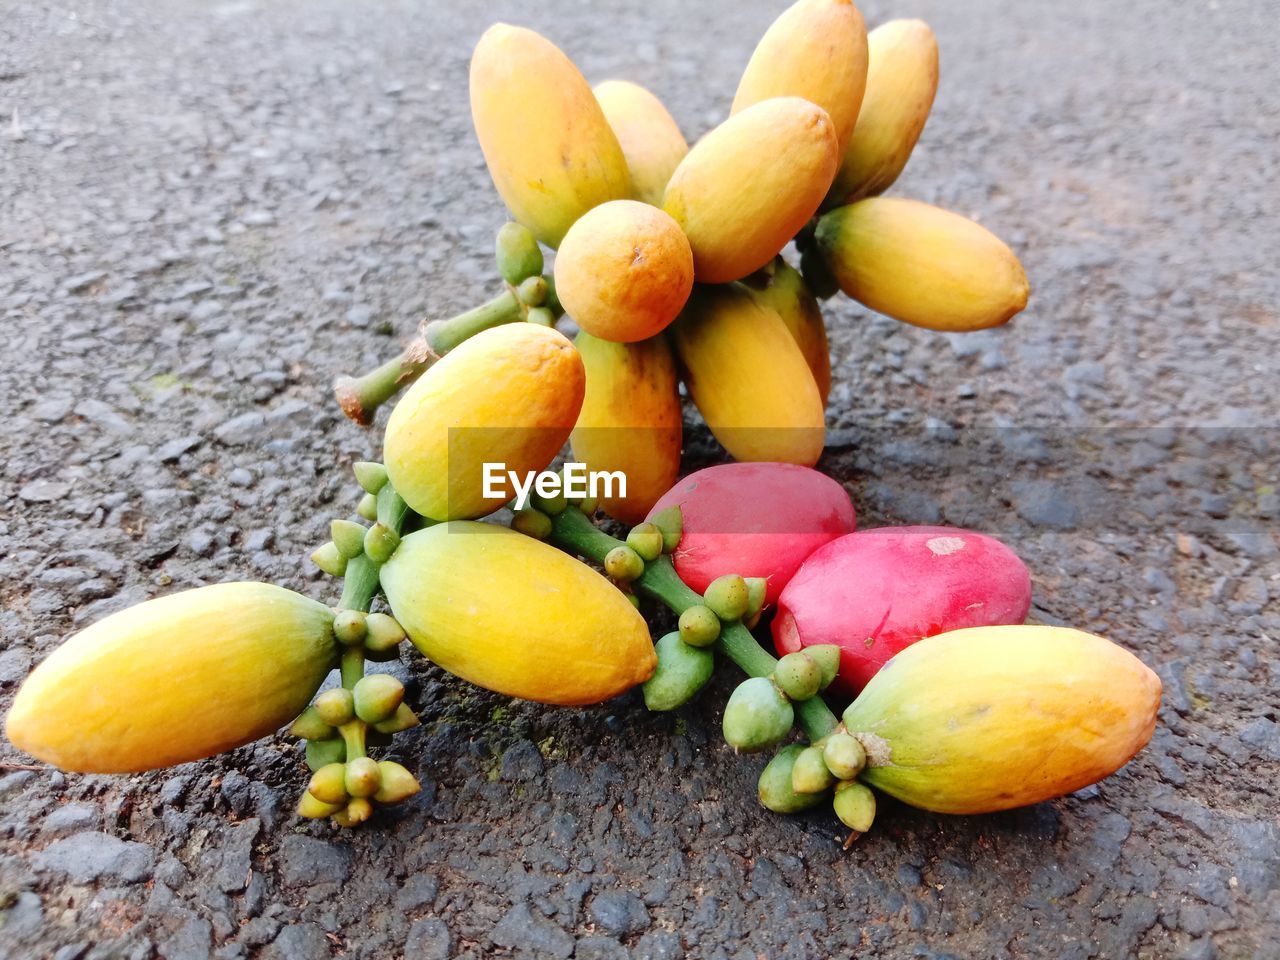 CLOSE-UP OF FRUITS ON TABLE